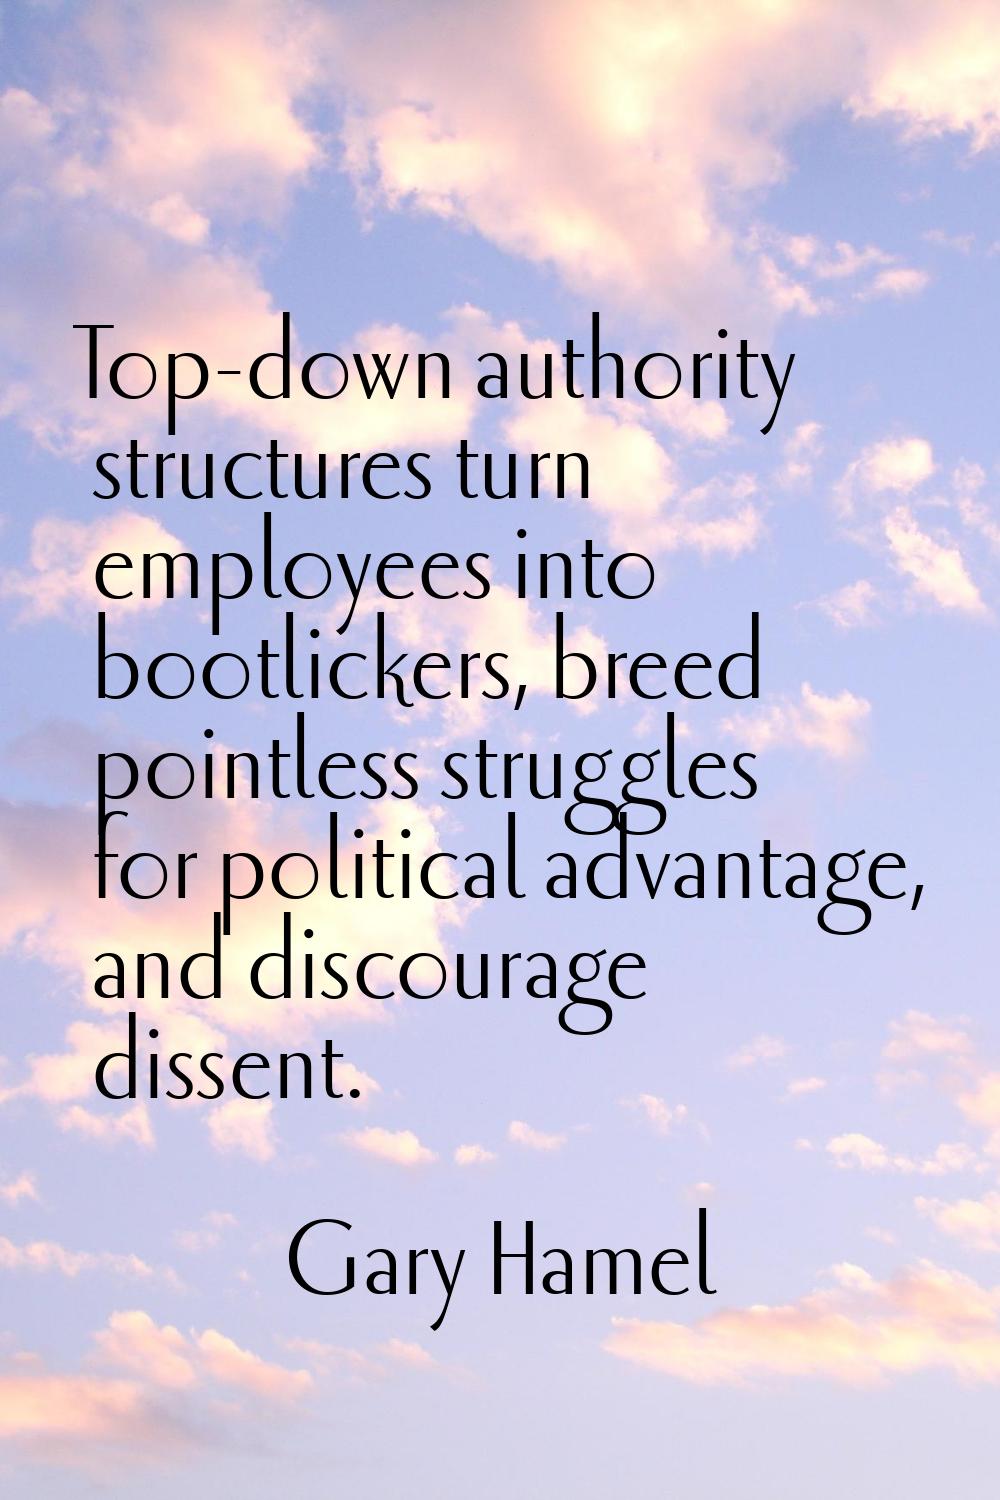 Top-down authority structures turn employees into bootlickers, breed pointless struggles for politi